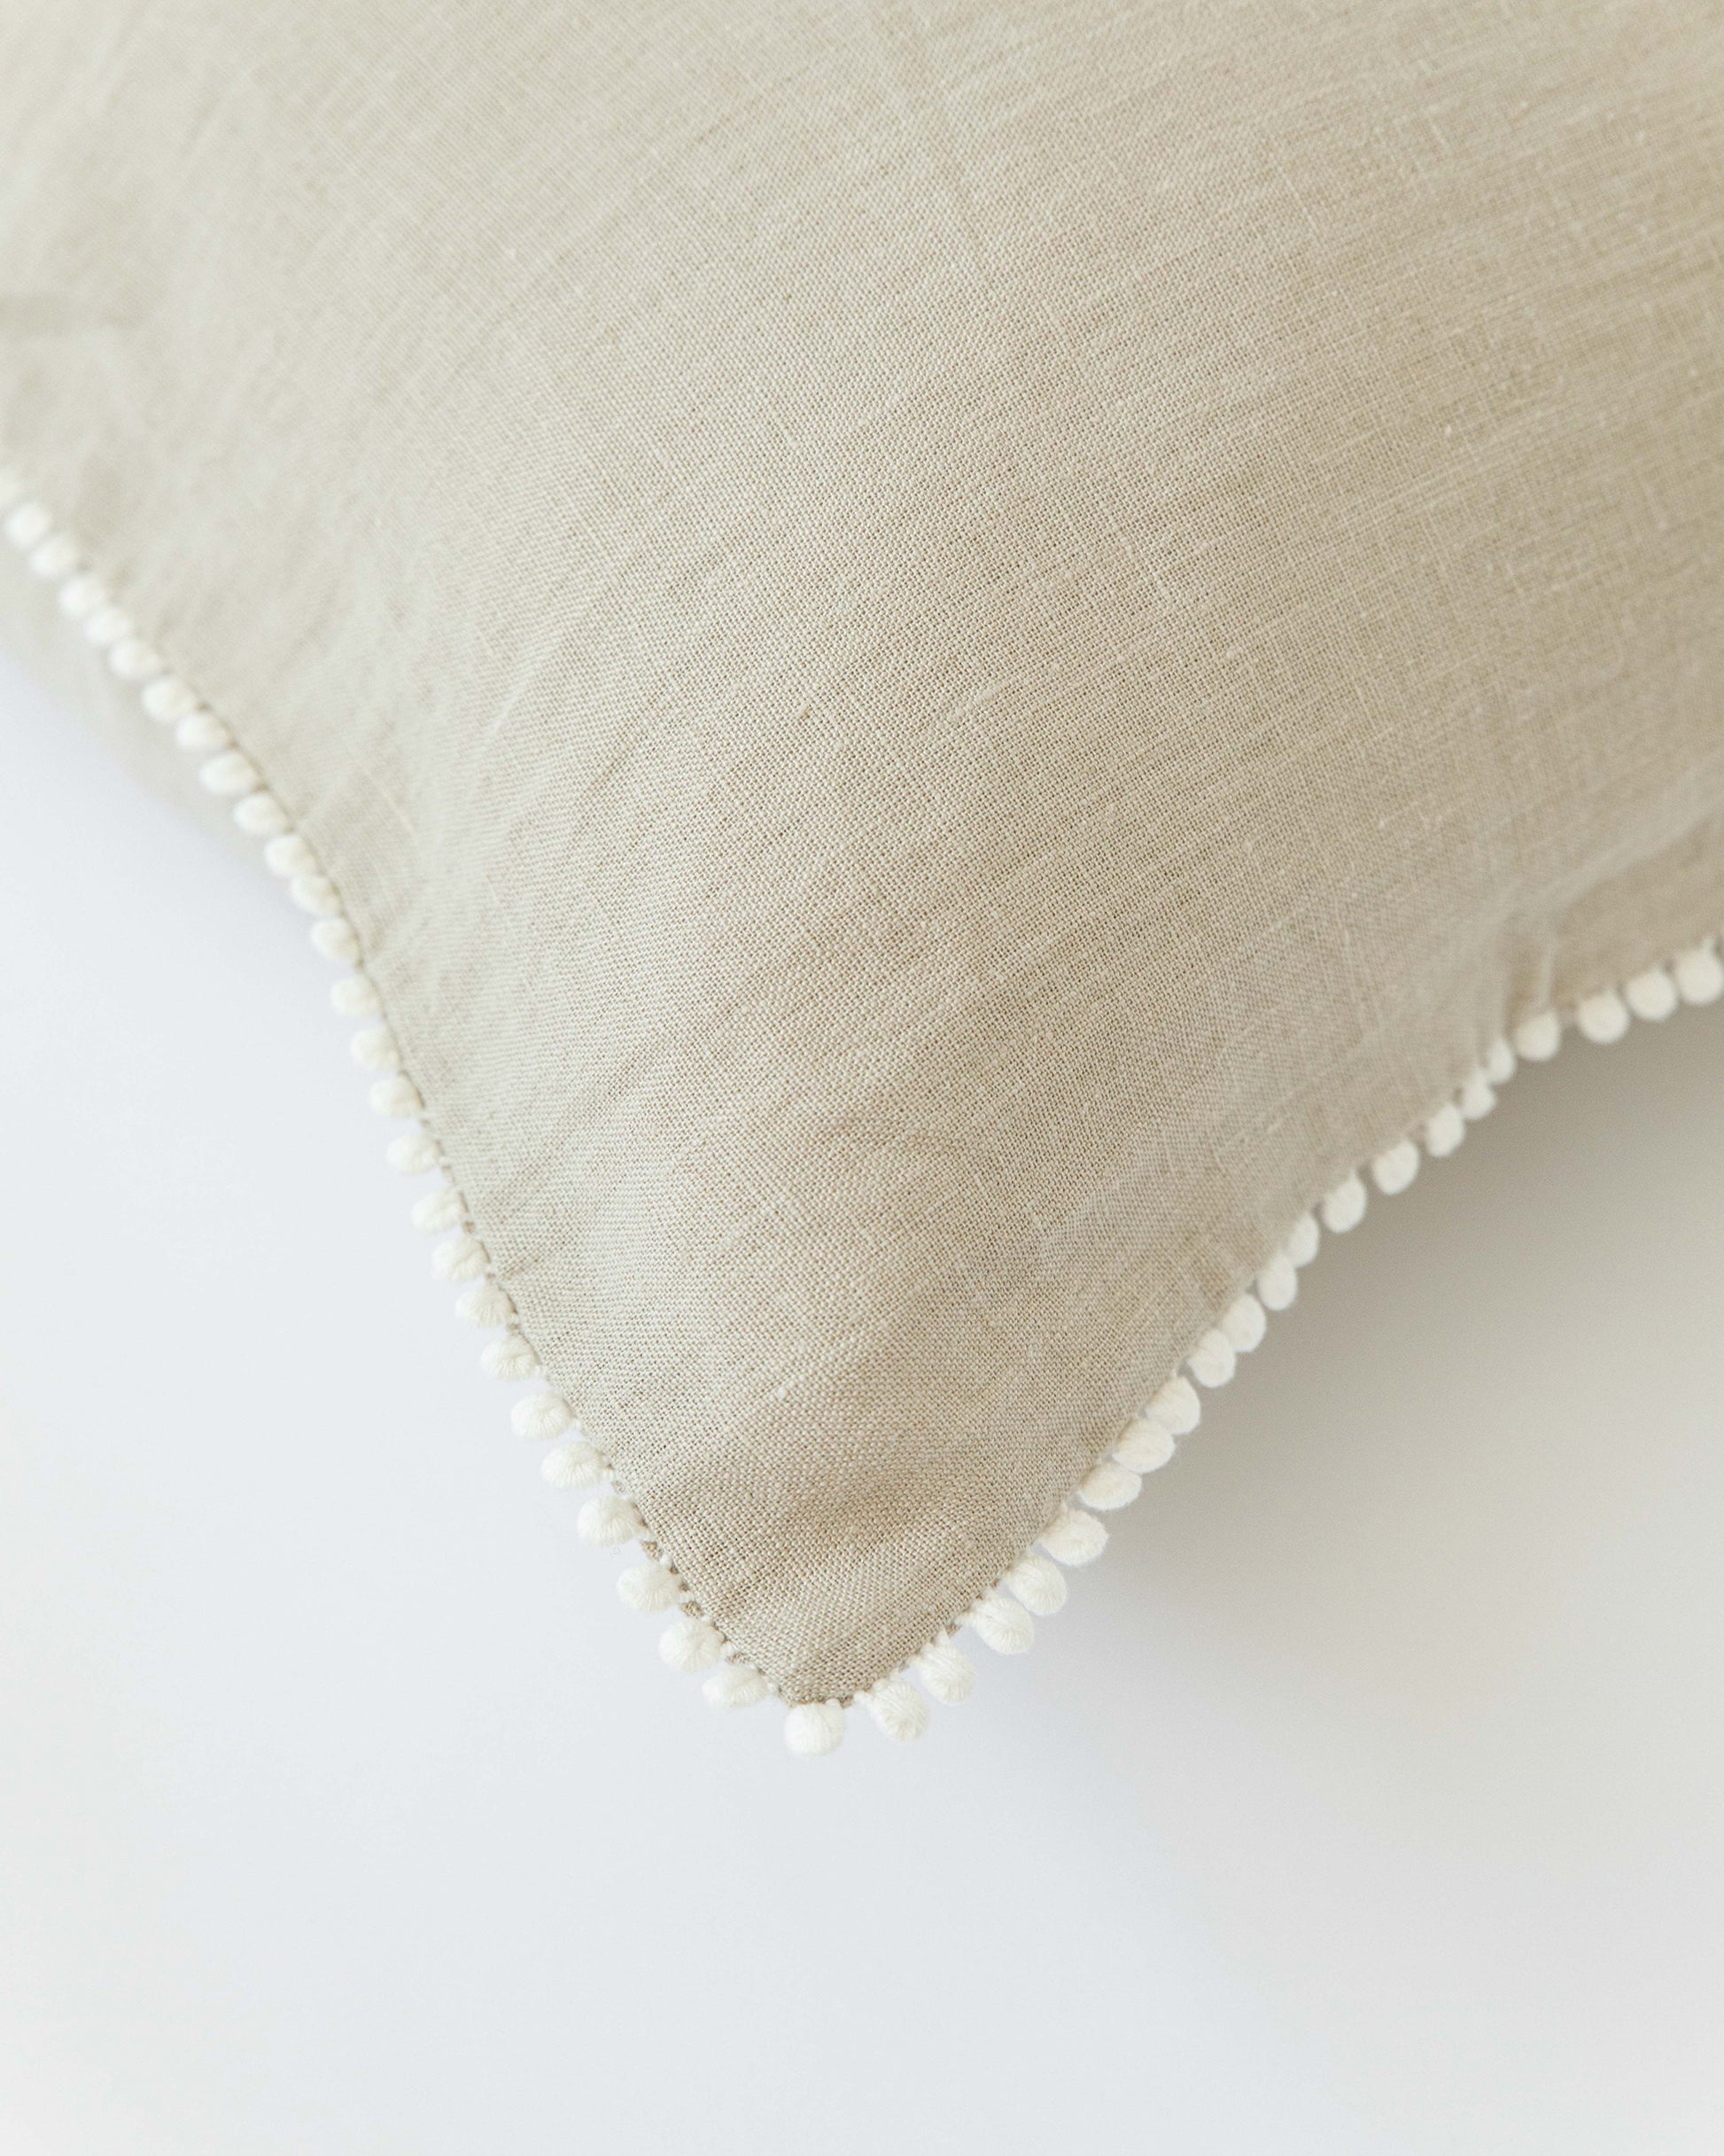 Cushion cover with pom poms in Natural linen - MagicLinen